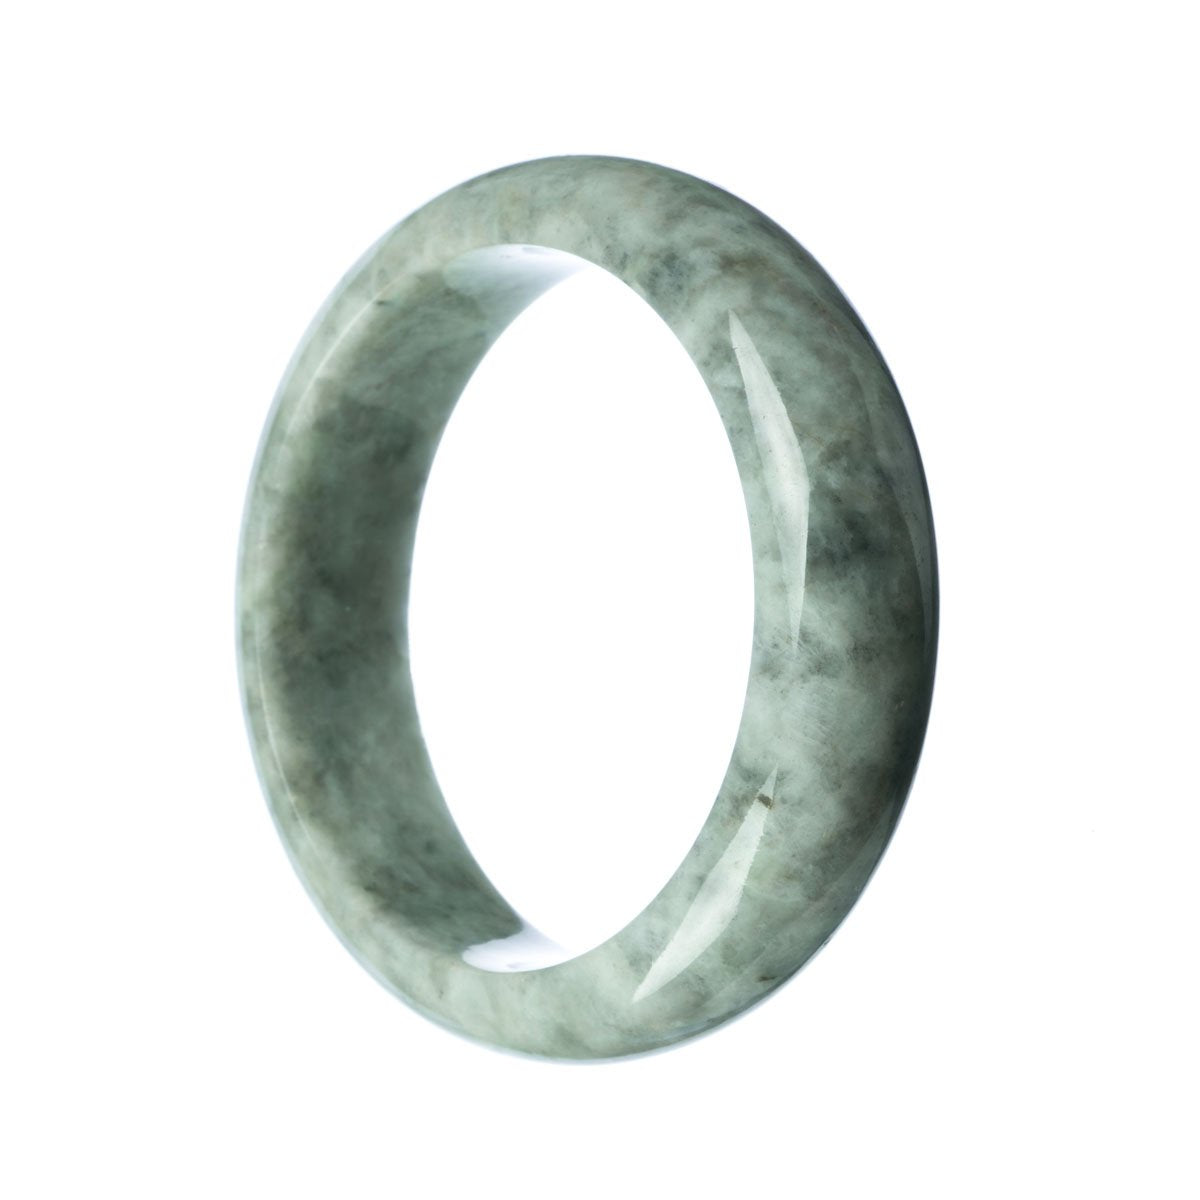 A close-up image of a genuine Grade A grey green jadeite jade bracelet with a half moon shape, measuring 58mm in size. The bracelet is beautifully crafted and is sold by MAYS GEMS.